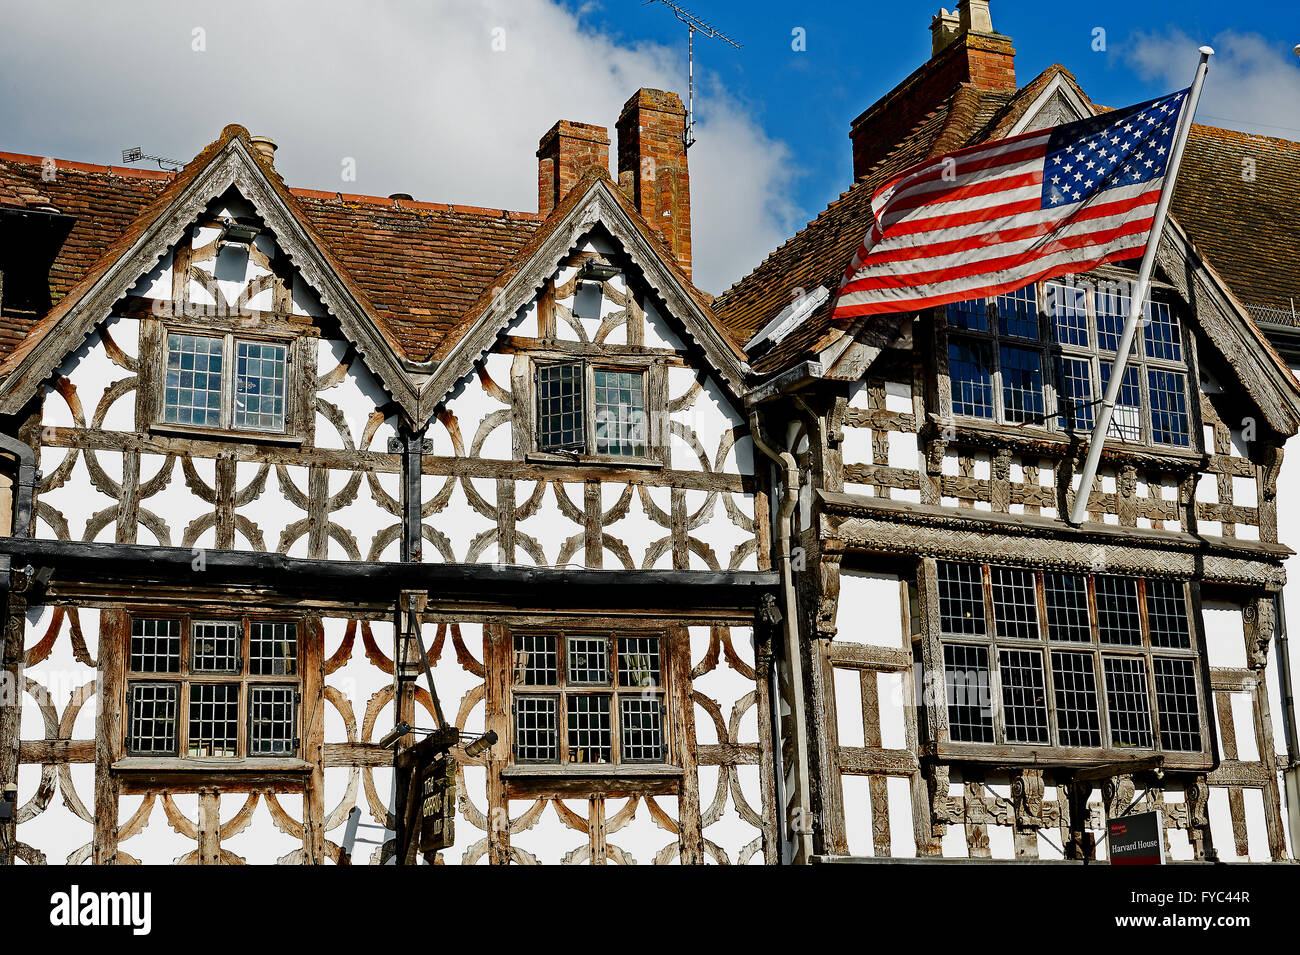 Harvard House in the centre of Stratford upon Avon with the United States Stars and Stripes flag flying Stock Photo